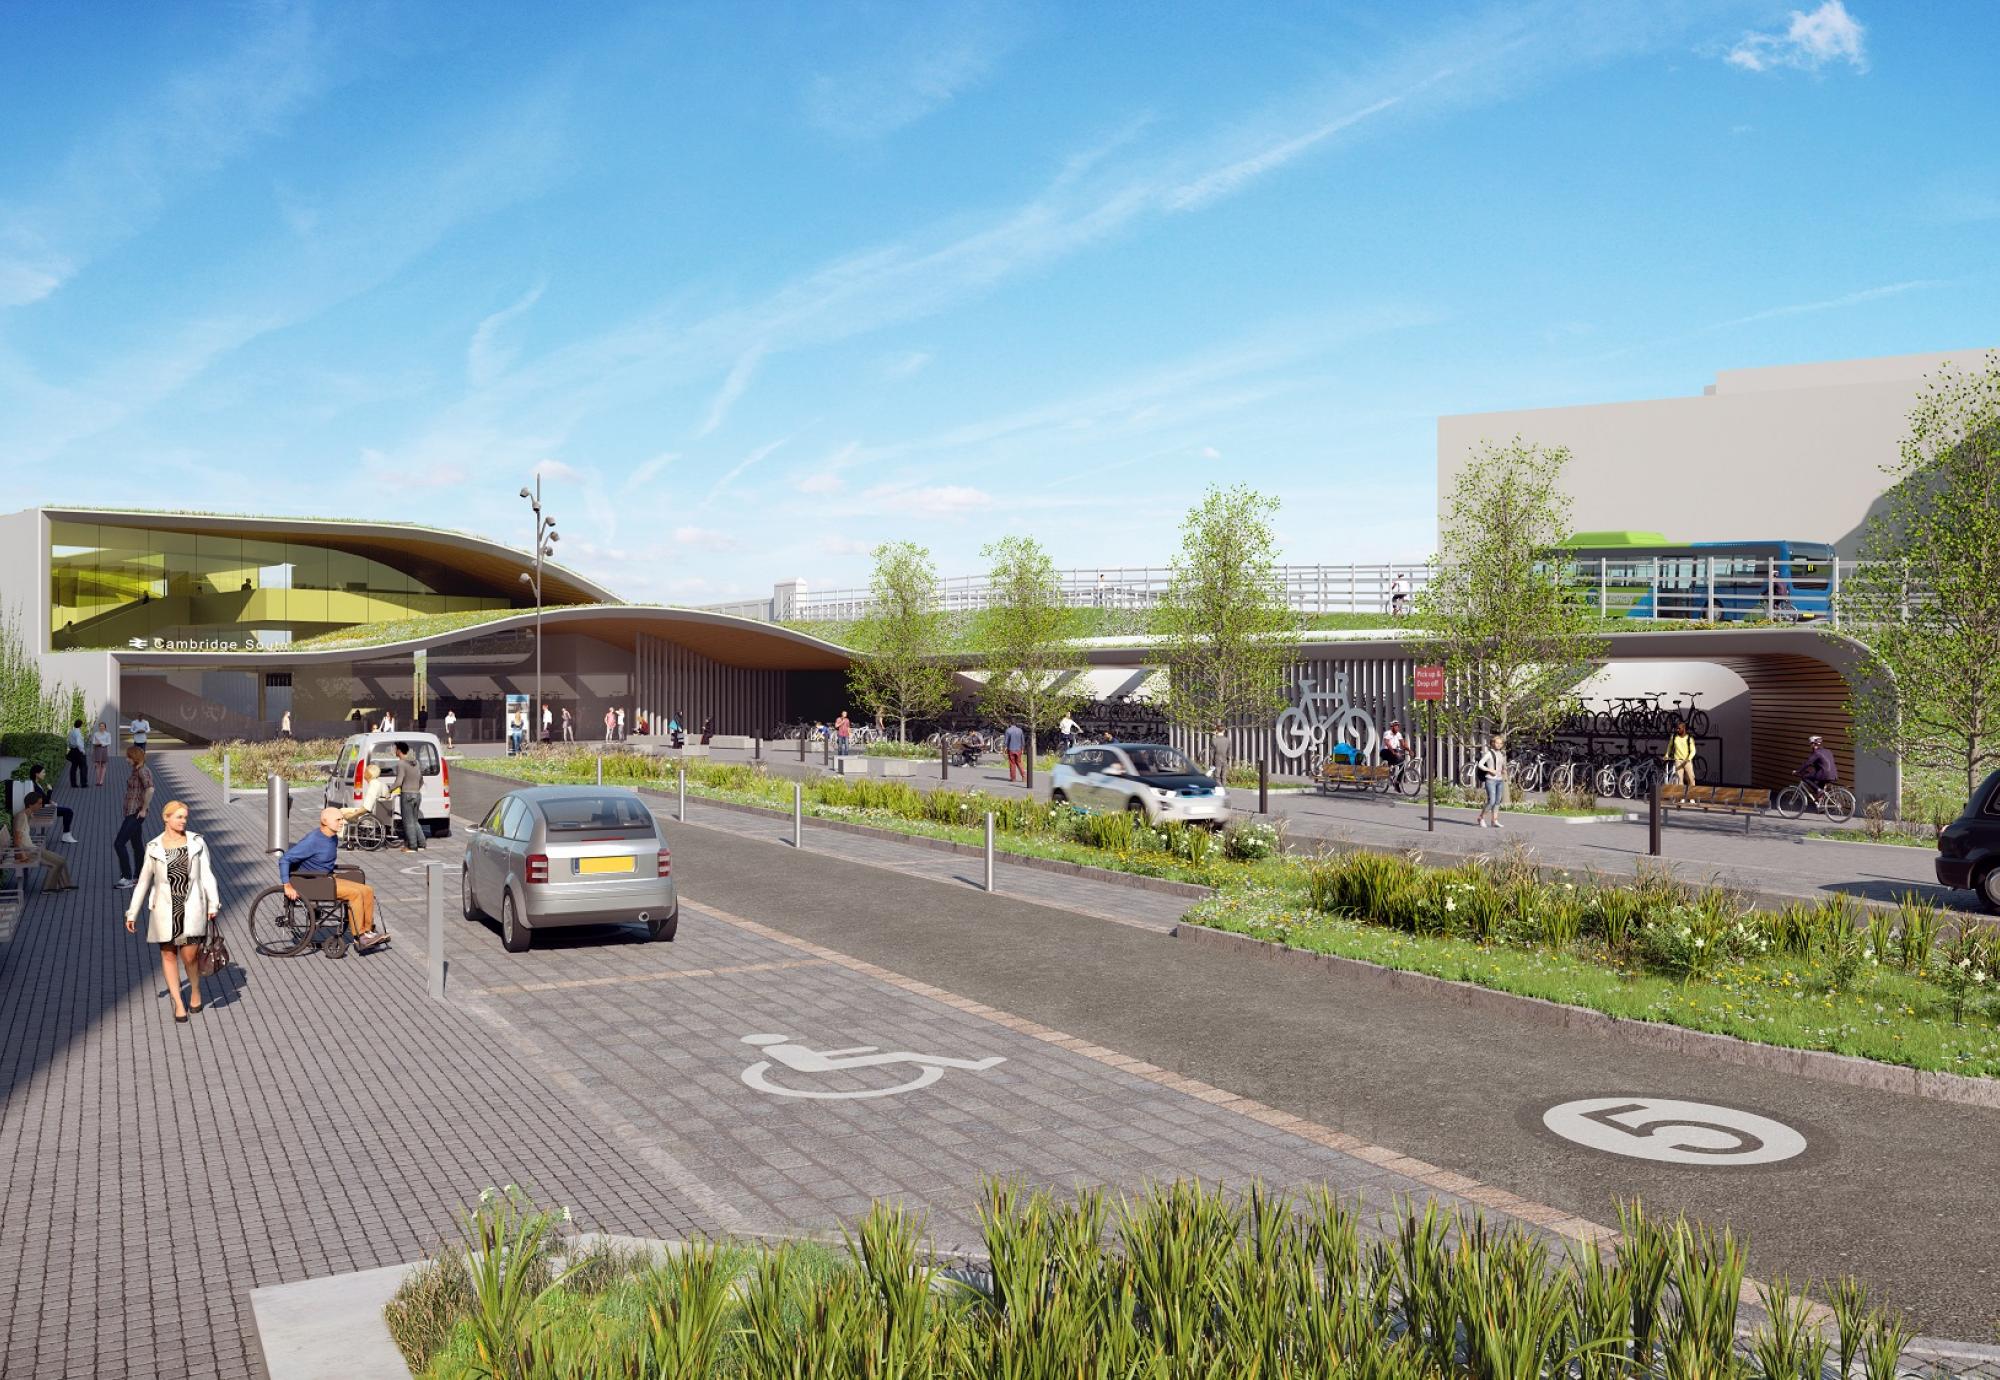 Artist's impression of the proposed Cambridge South station